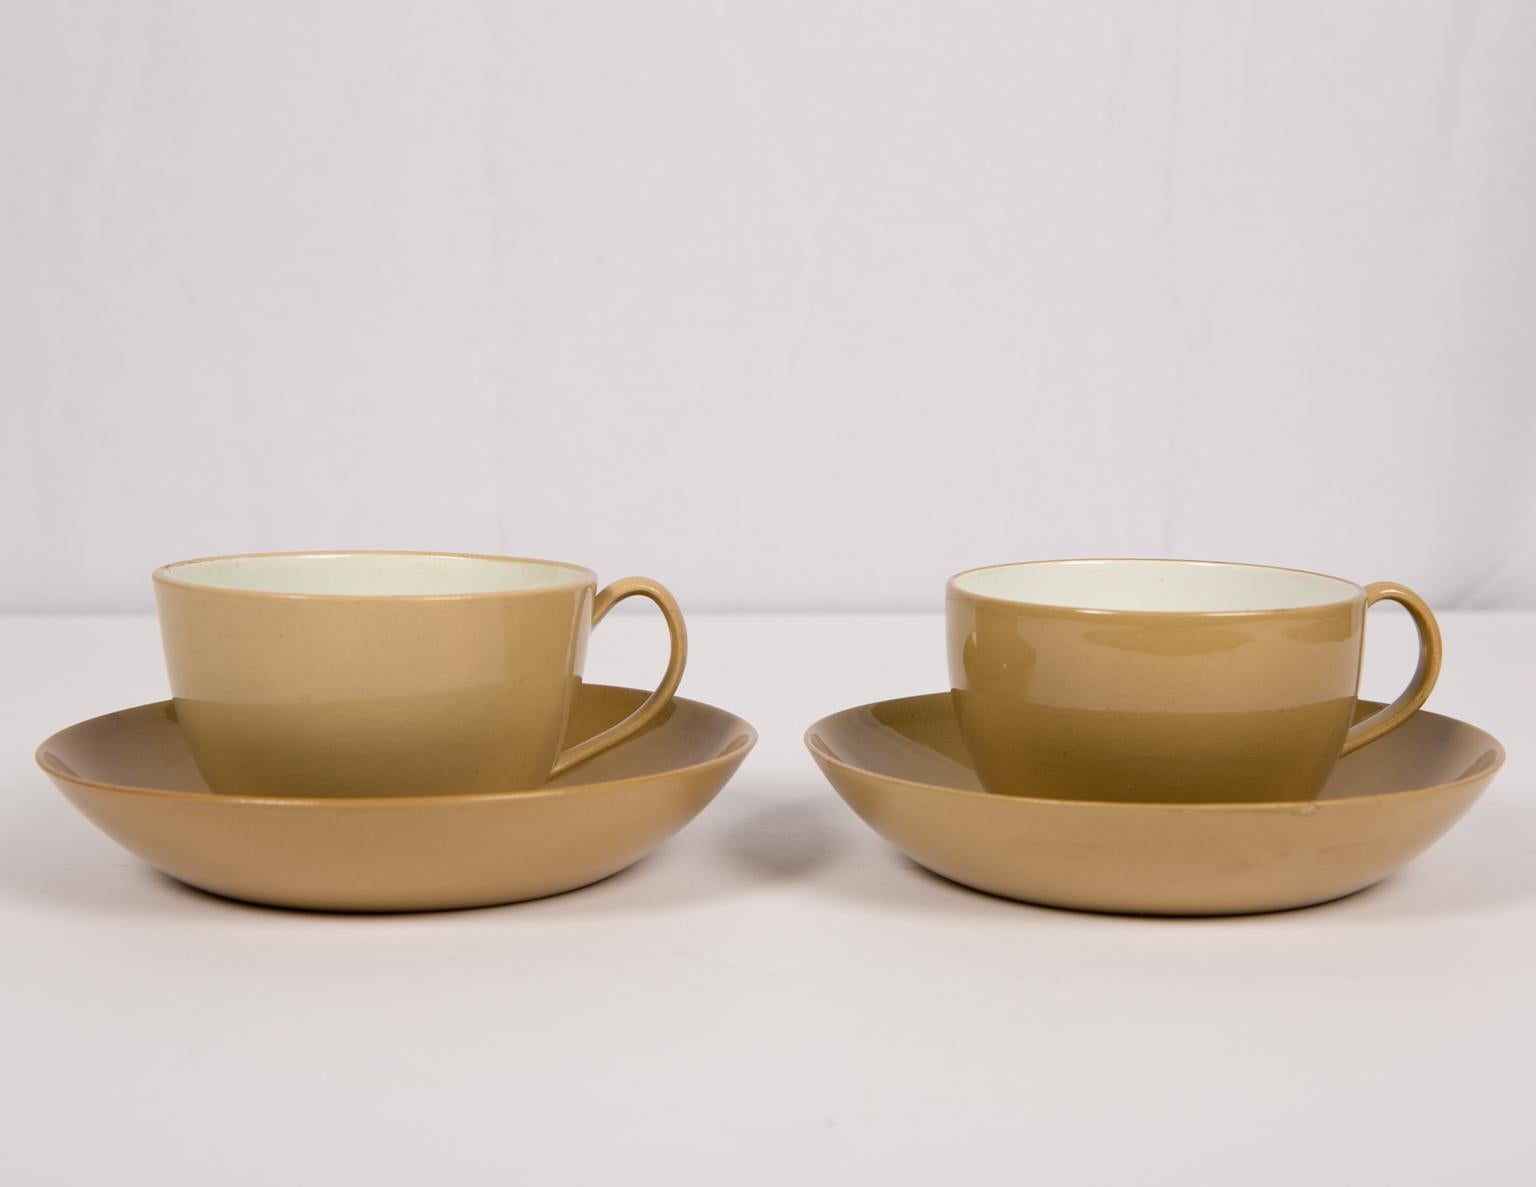 English Pair of Wedgwood Drabware Cups and Saucers Made in England circa 1800